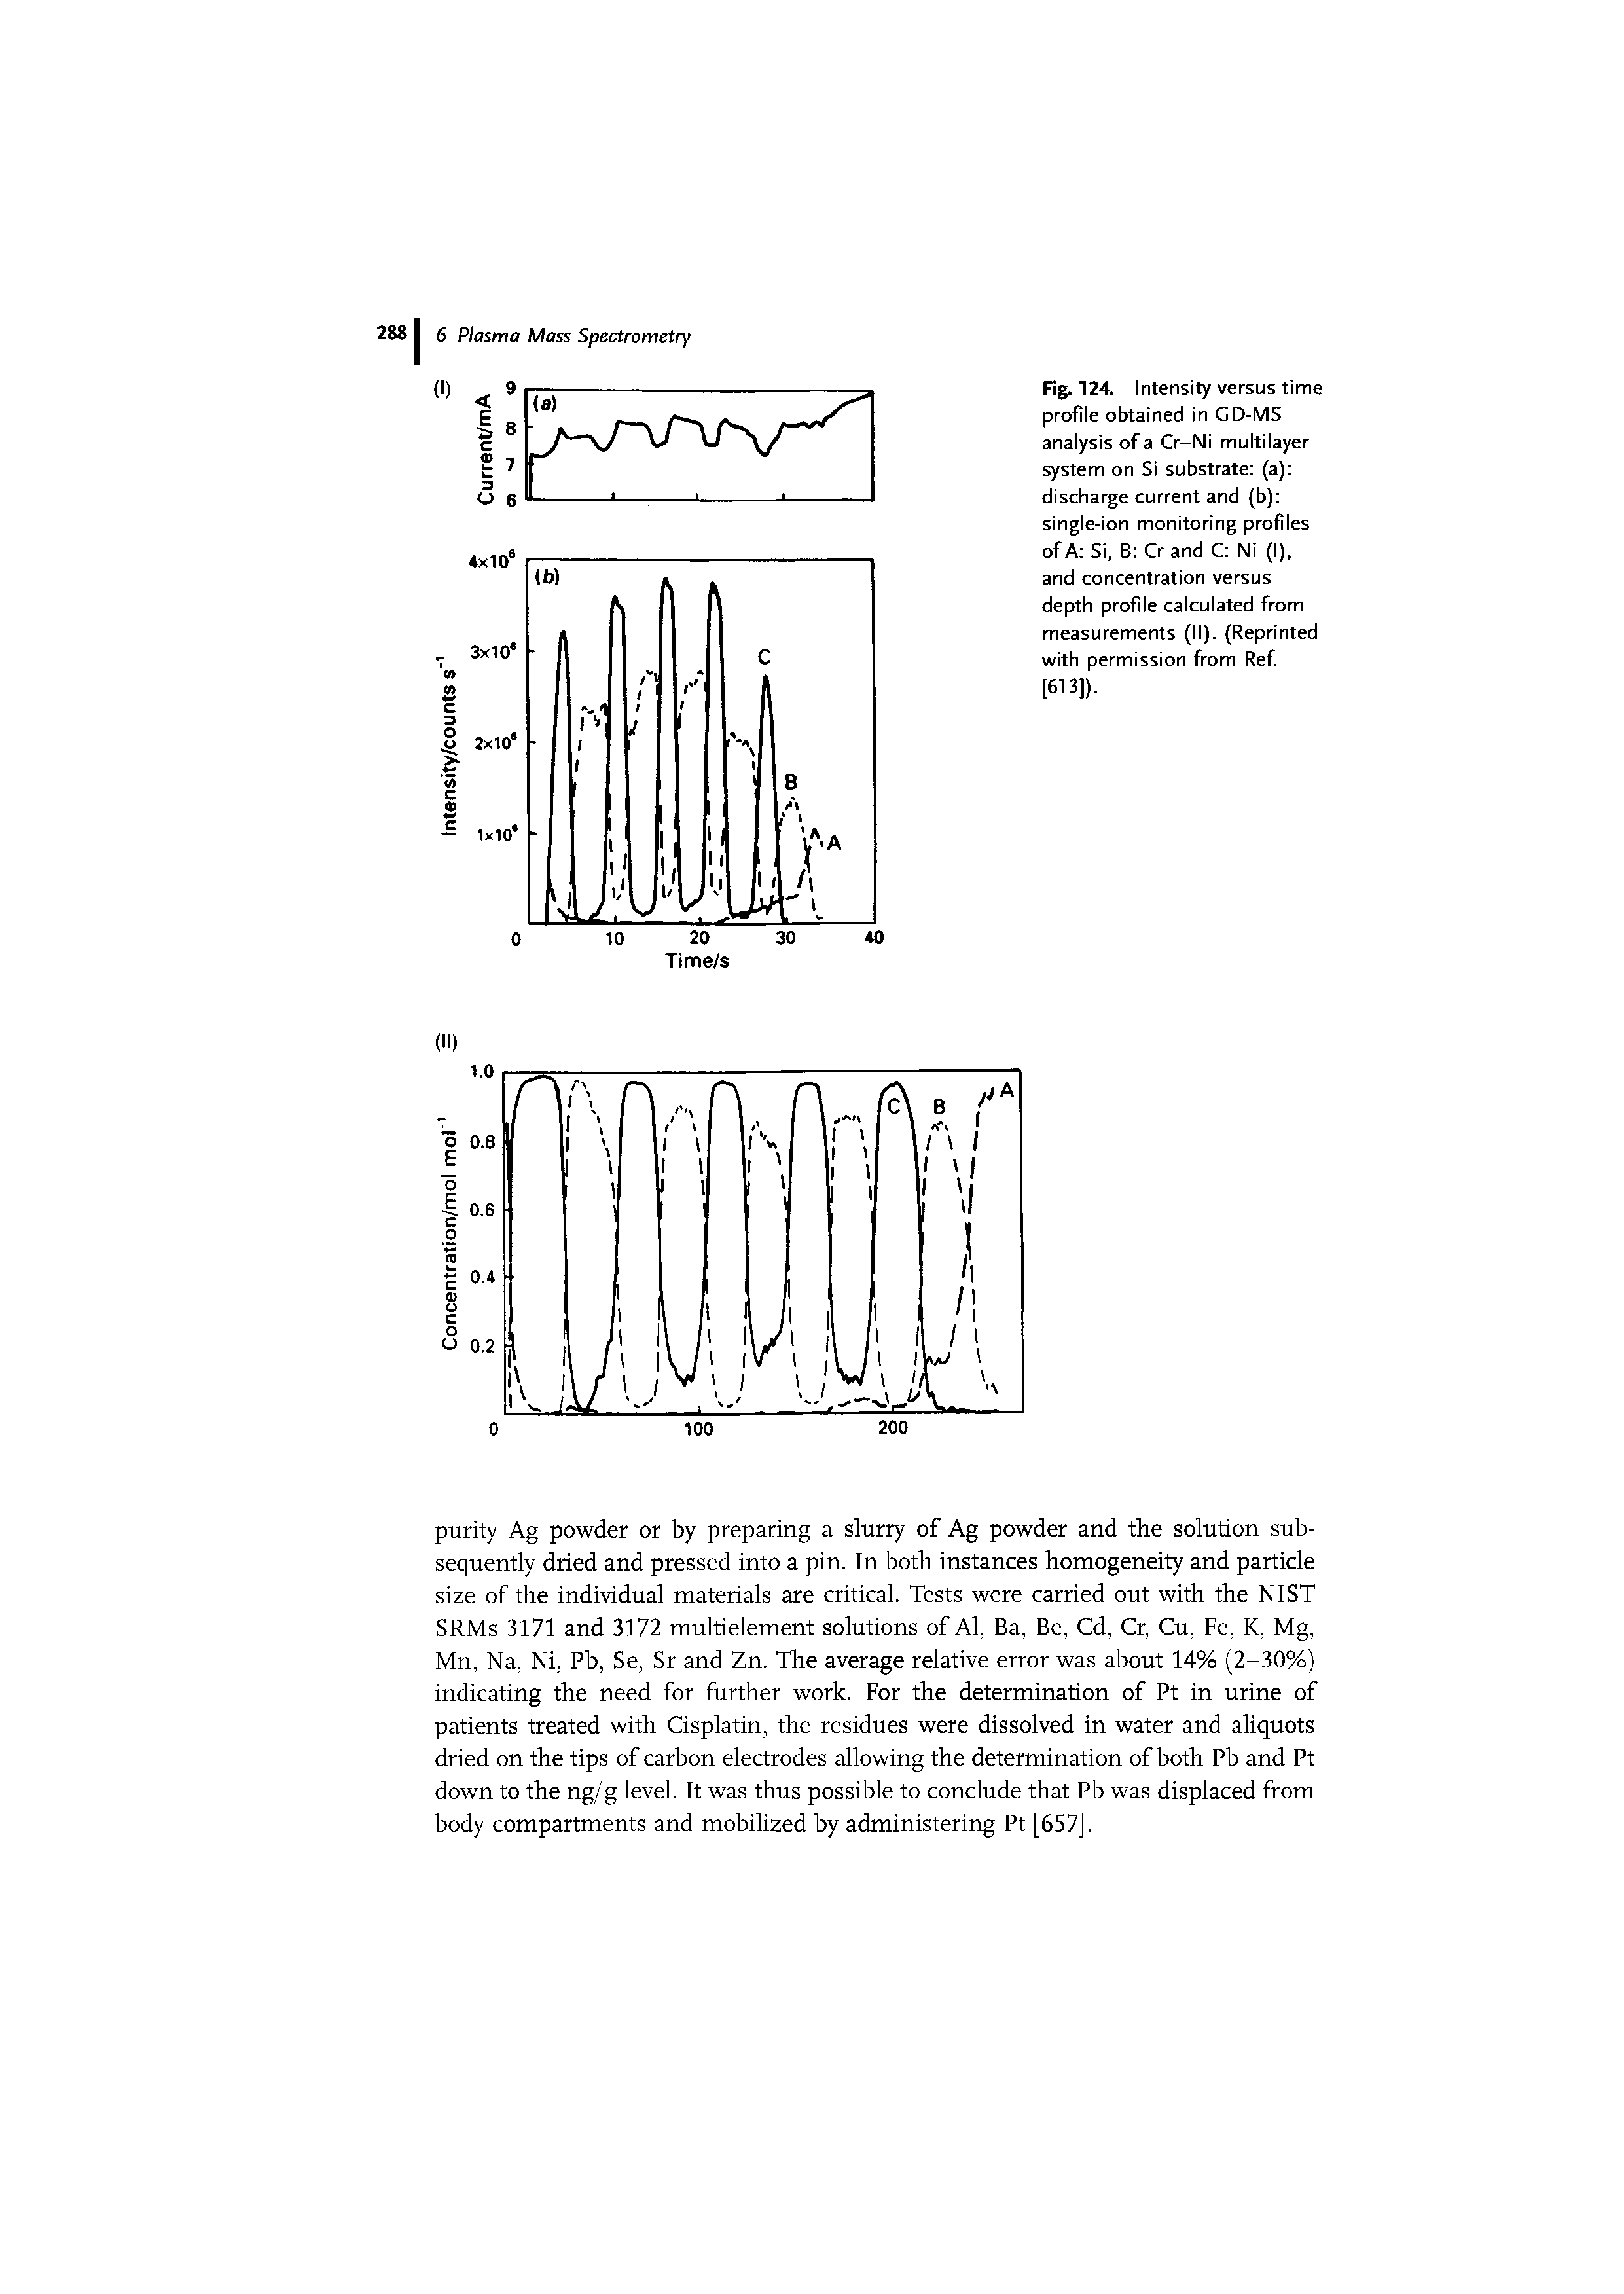 Fig. 124. Intensity versus time profile obtained in GD-MS analysis of a Cr-Ni multilayer system on Si substrate (a) discharge current and (b) single-ion monitoring profiles of A Si, B Cr and C Ni (I), and concentration versus depth profile calculated from measurements (II). (Reprinted with permission from Ref. [613]).